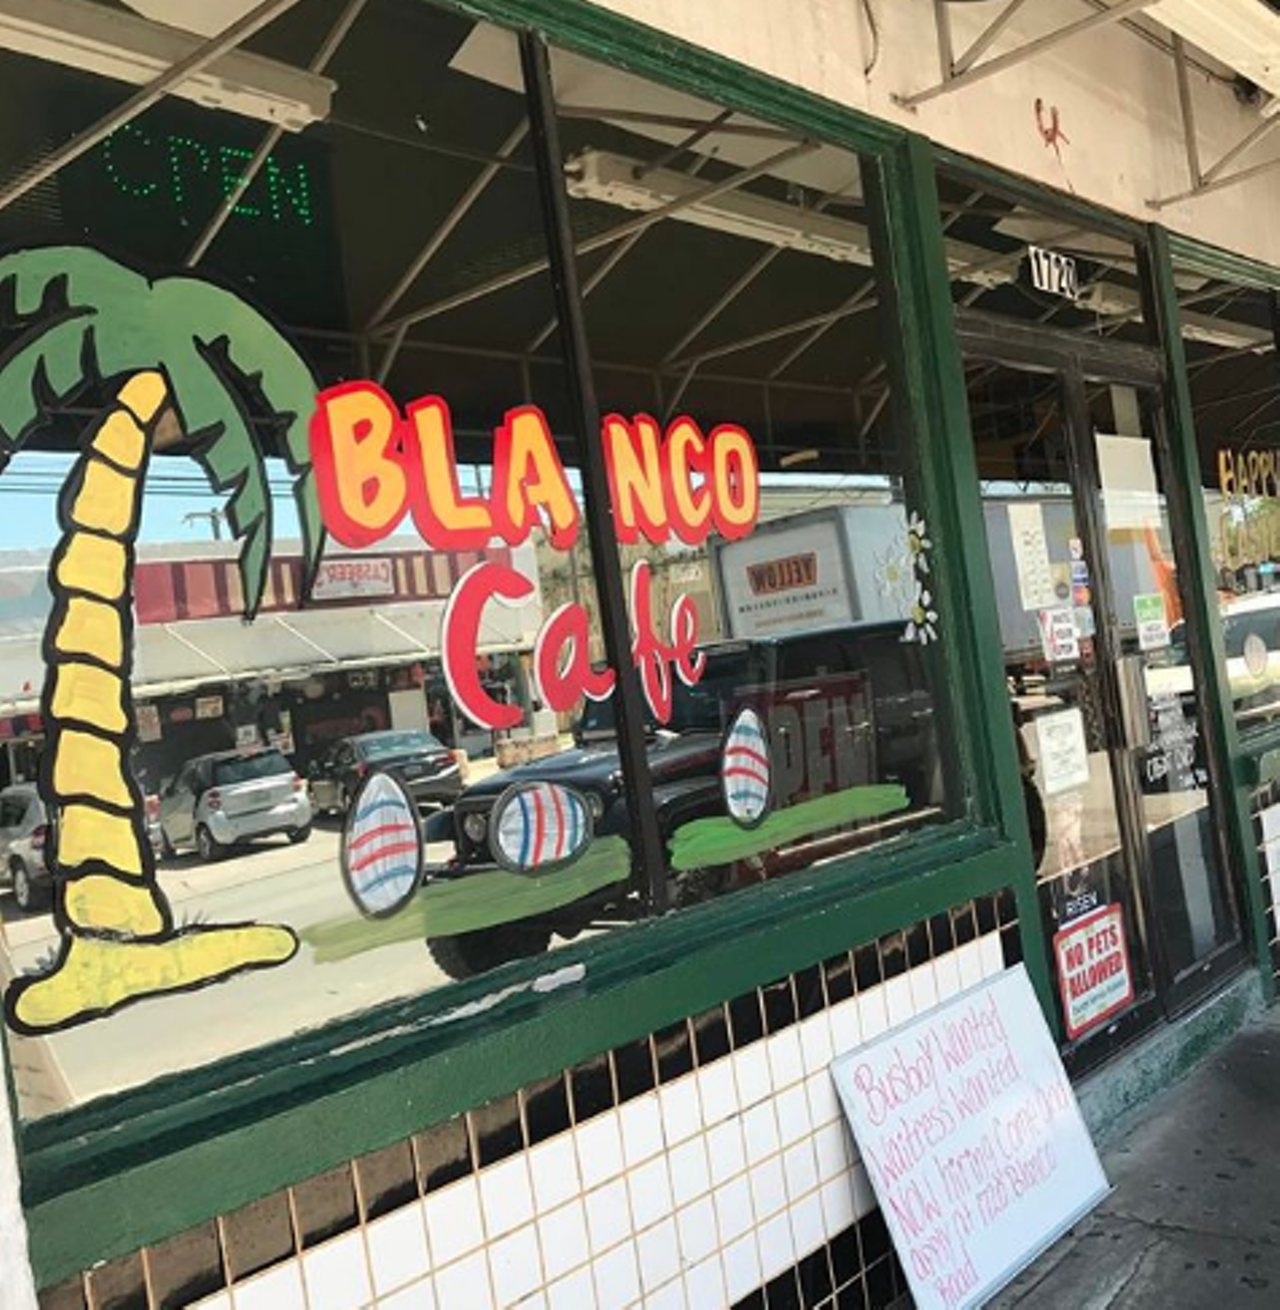 Blanco Cafe
Multiple locations, blancocafe.net
While this cafe is known for Tex-Mex, that’s not to say it doesn’t do right by the American dishes. Skip the city-famous enchiladas and try the chicken fried steak or salisbury steak.
Photo via Instagram / chez.garza